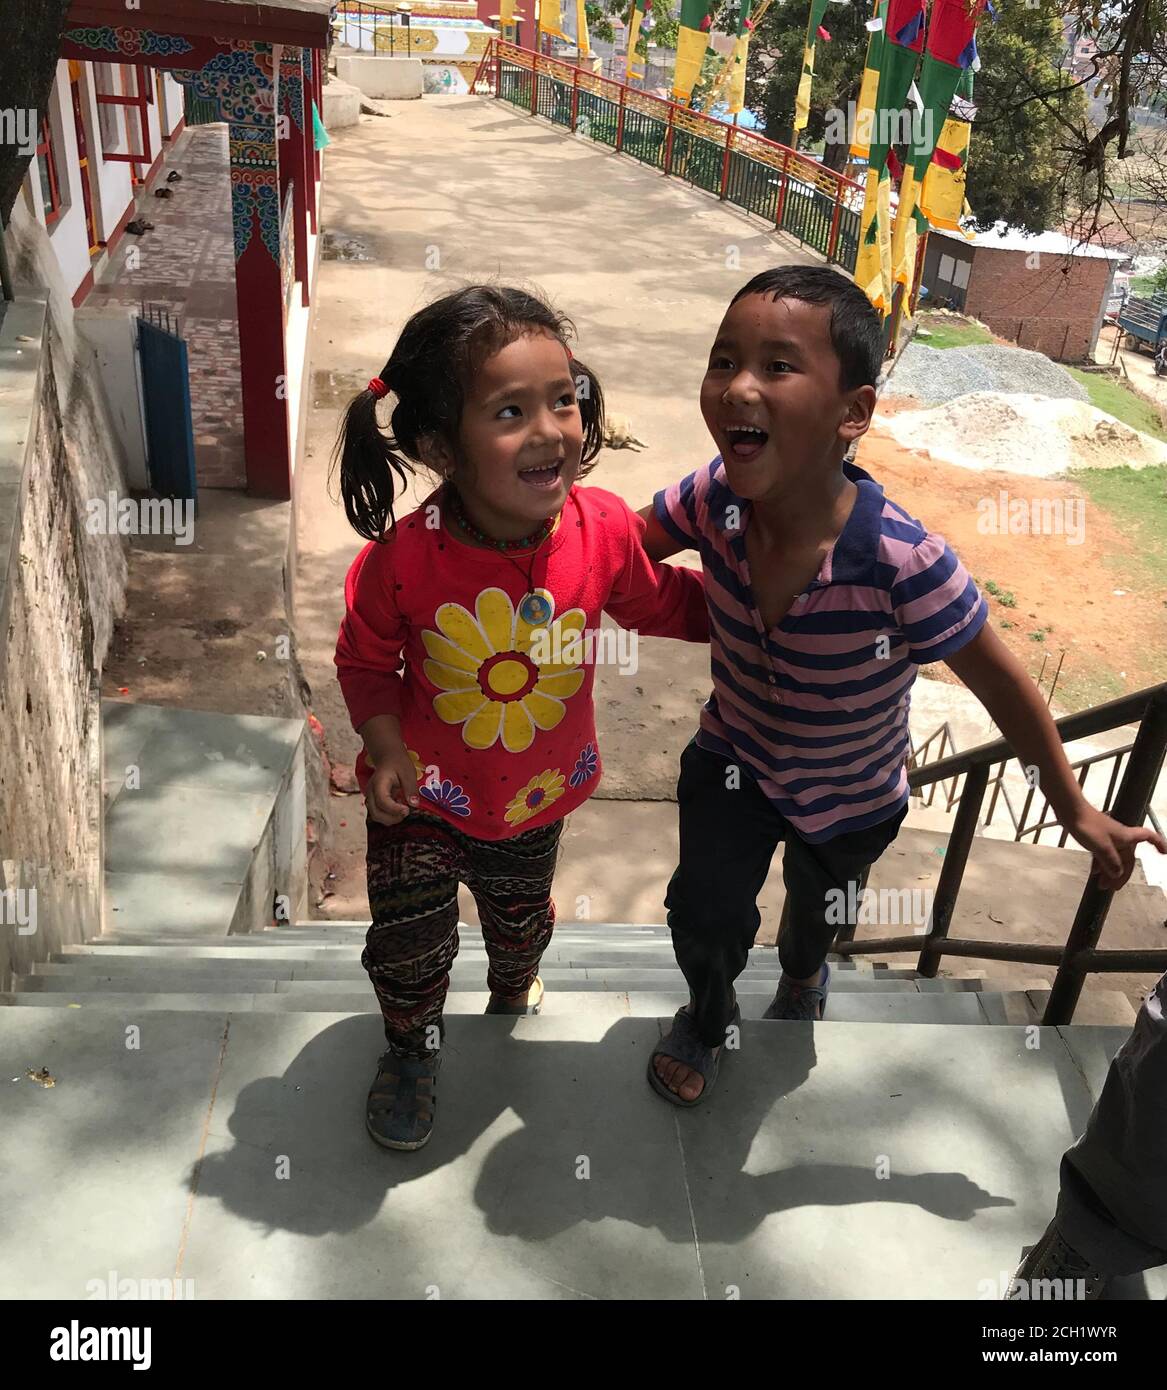 Cute smiling nepalese children. Laughing funny kids. Little friends, boy and girl from Kathmandu, Nepal. Happiness. Child smile. Glad nepali kids. Stock Photo